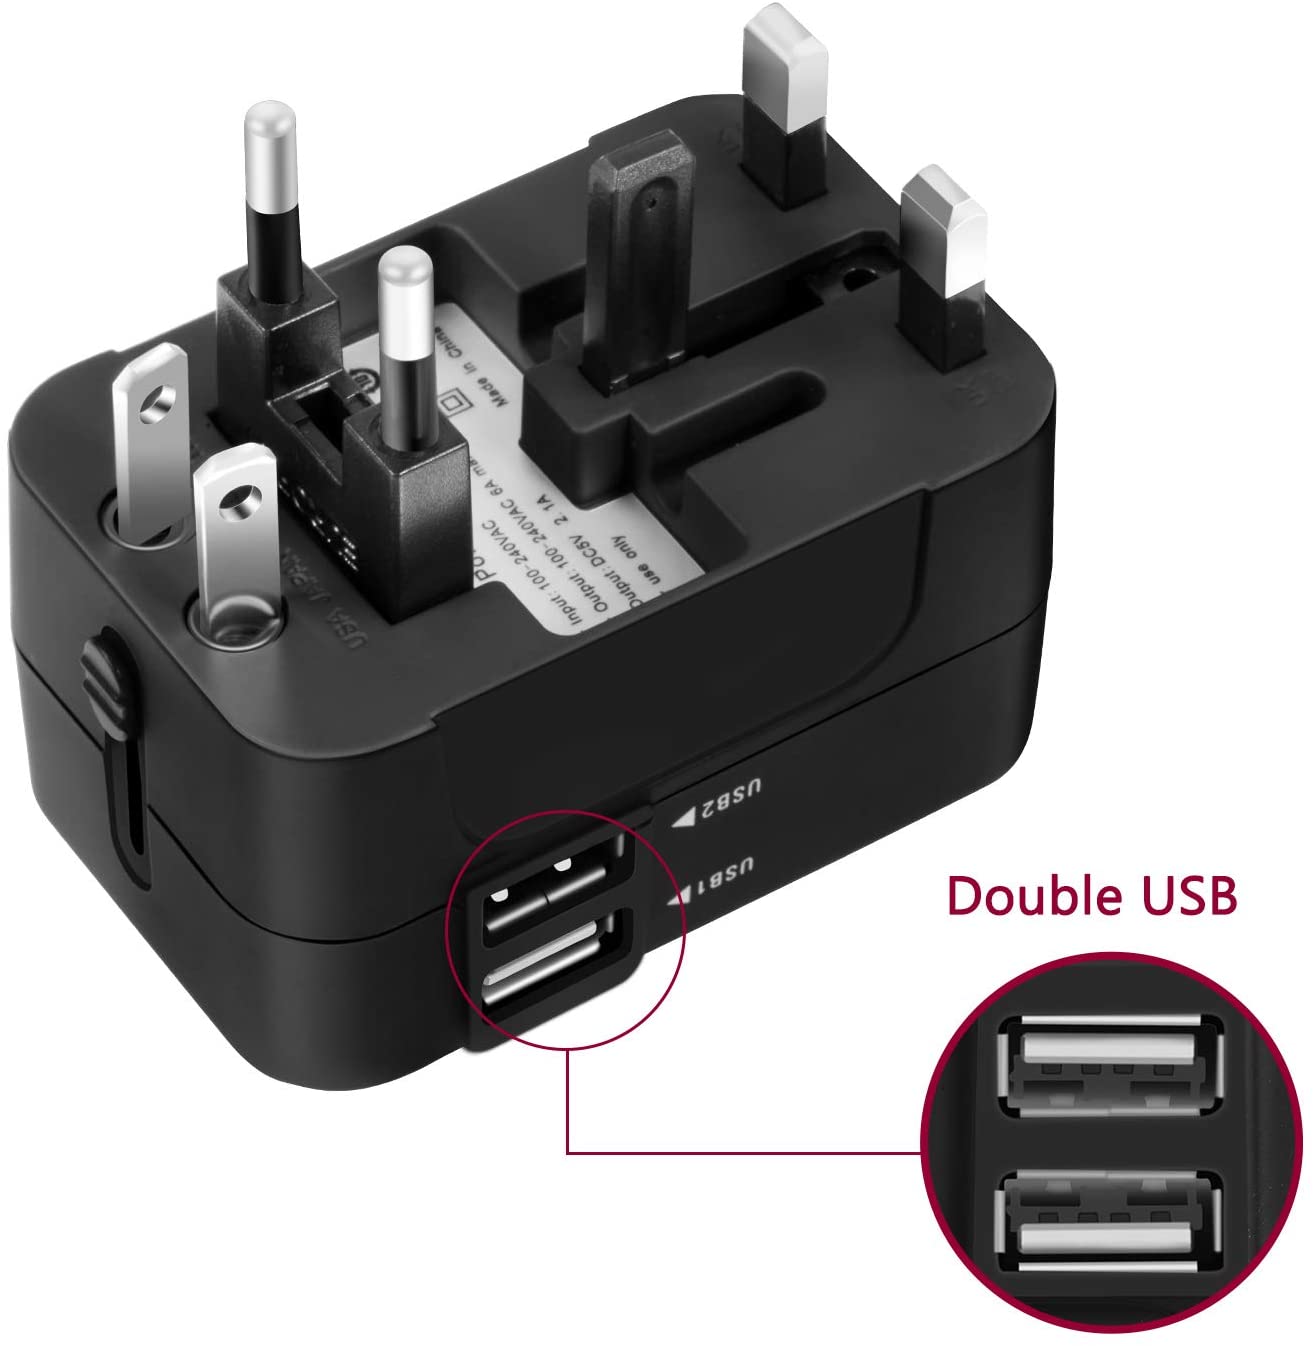 Travel Adapter, Worldwide All in One Universal Travel Adapter Wall Charger  AC Power Plug Adapter with Dual USB Charging Ports for USA EU UK AUS, White